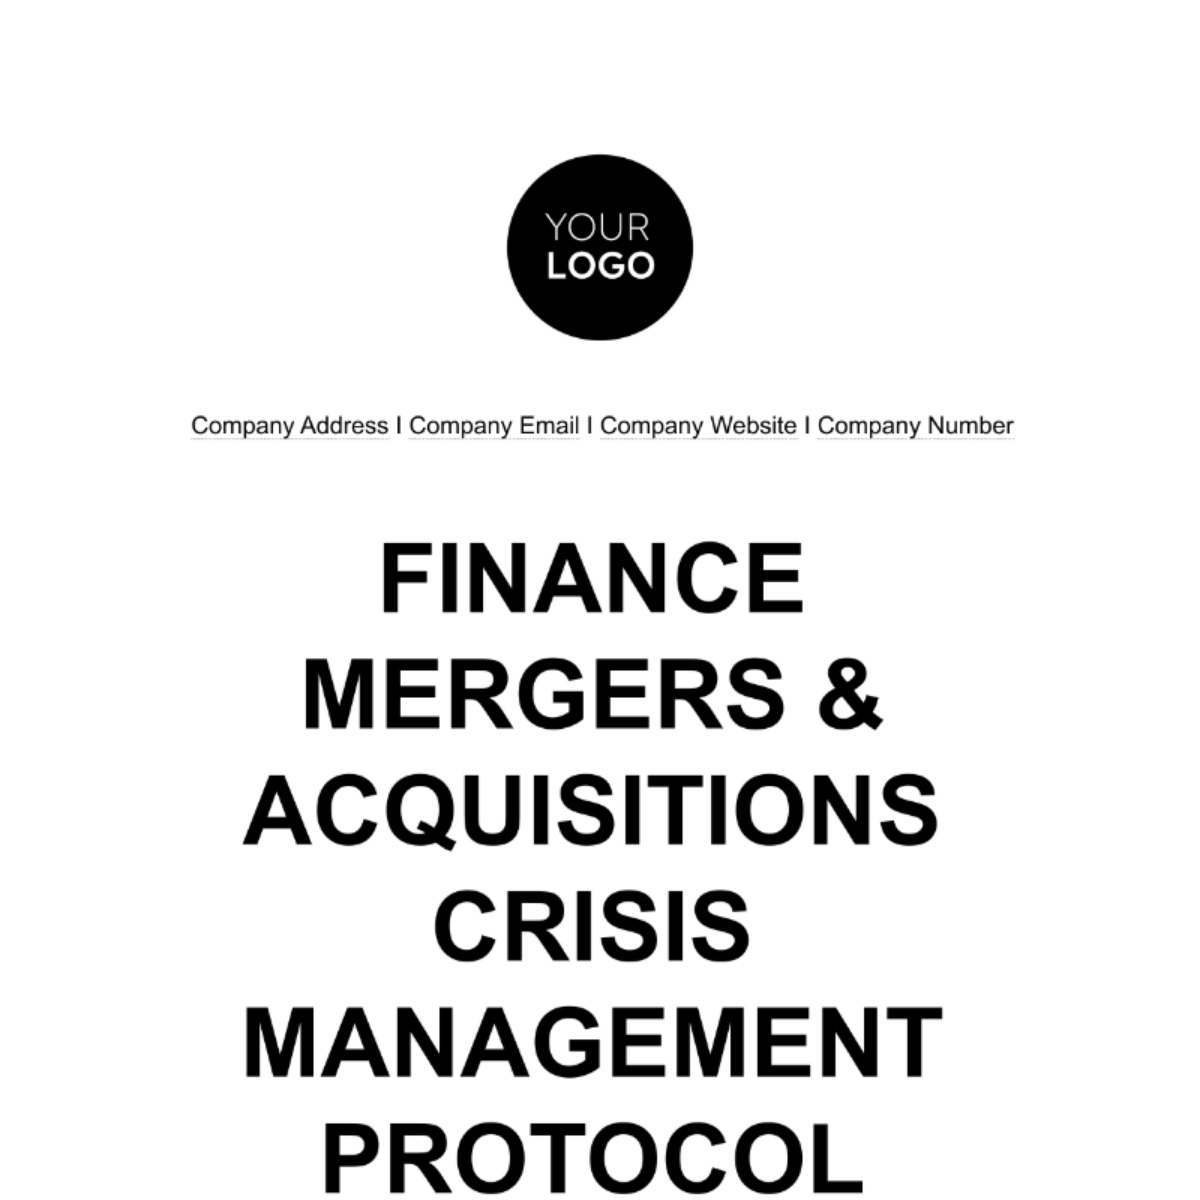 Free Finance Mergers & Acquisitions Crisis Management Protocol Template